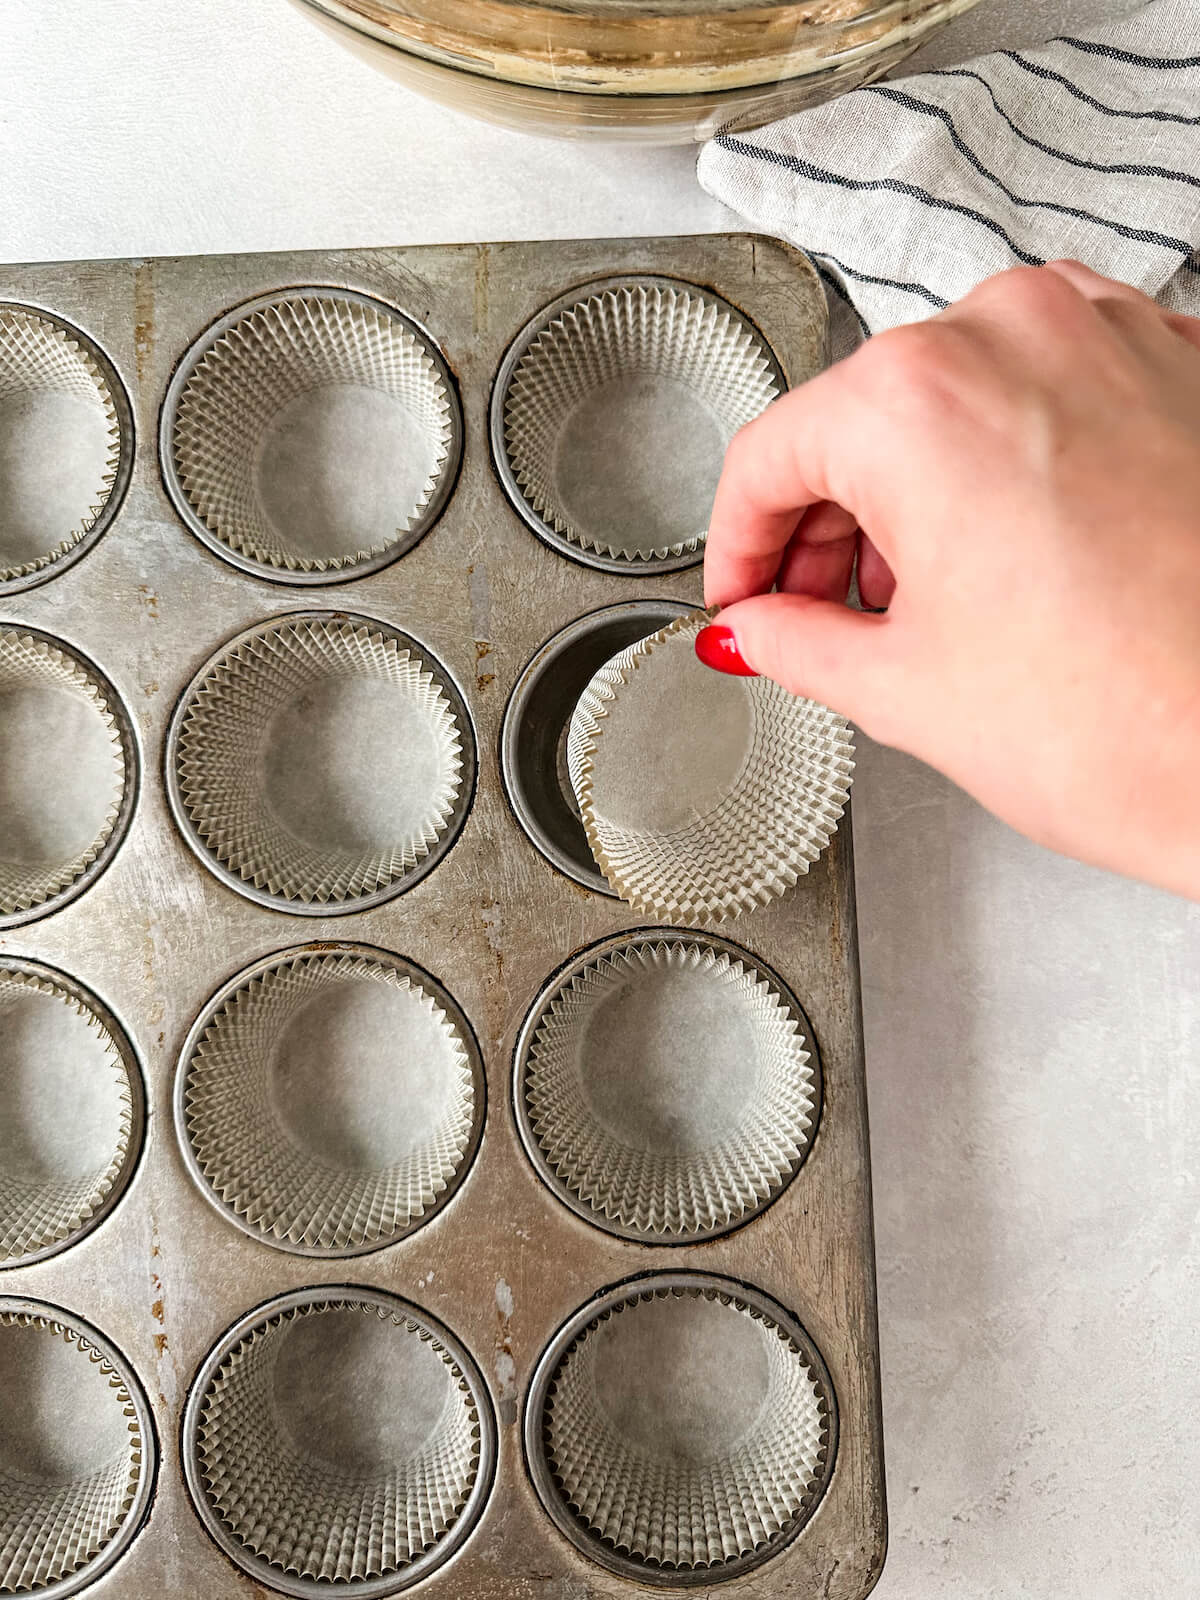 Adding muffin papers to a muffin tin.